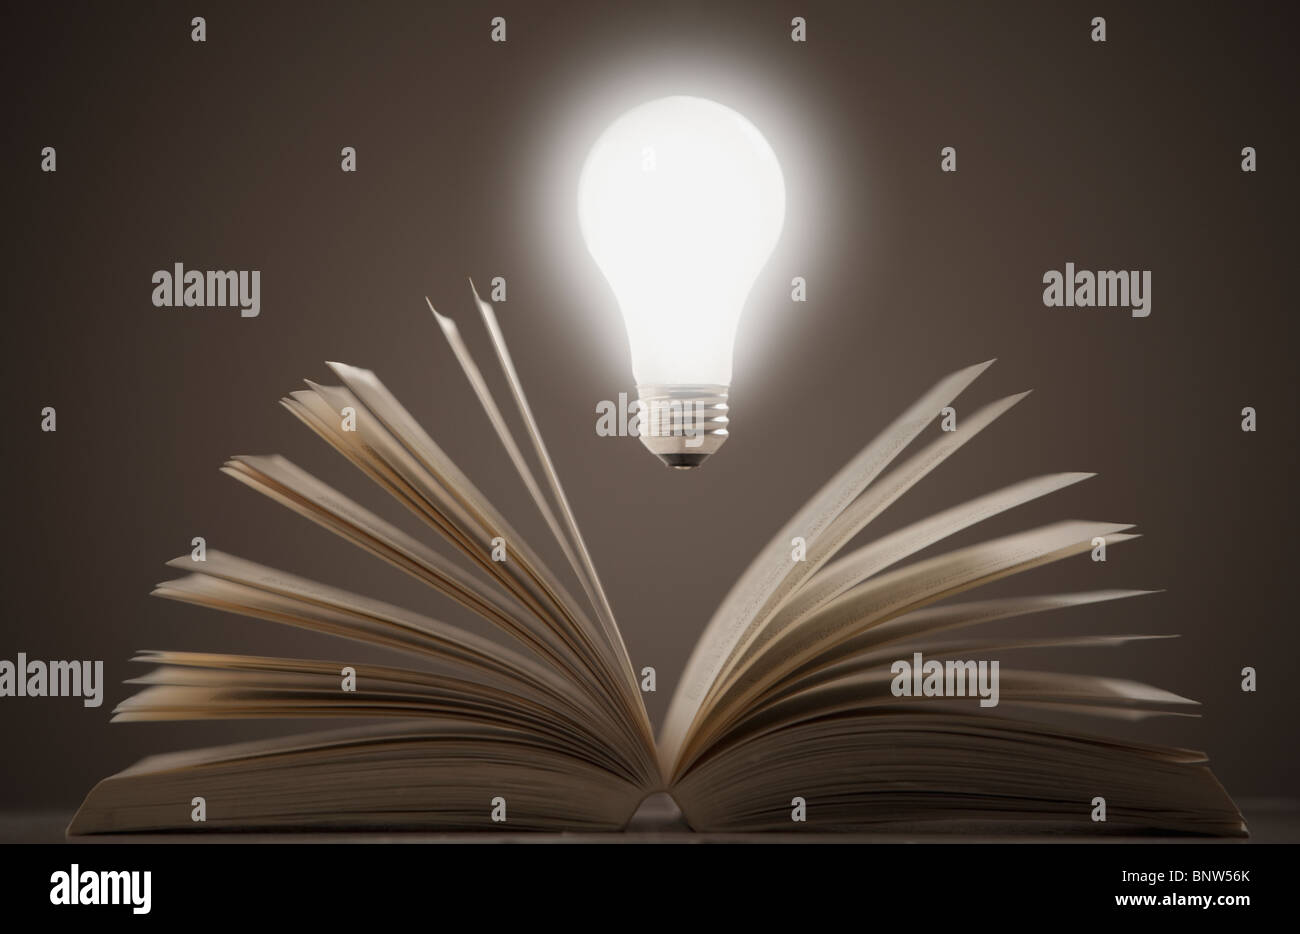 Light bulb floating above open book Stock Photo